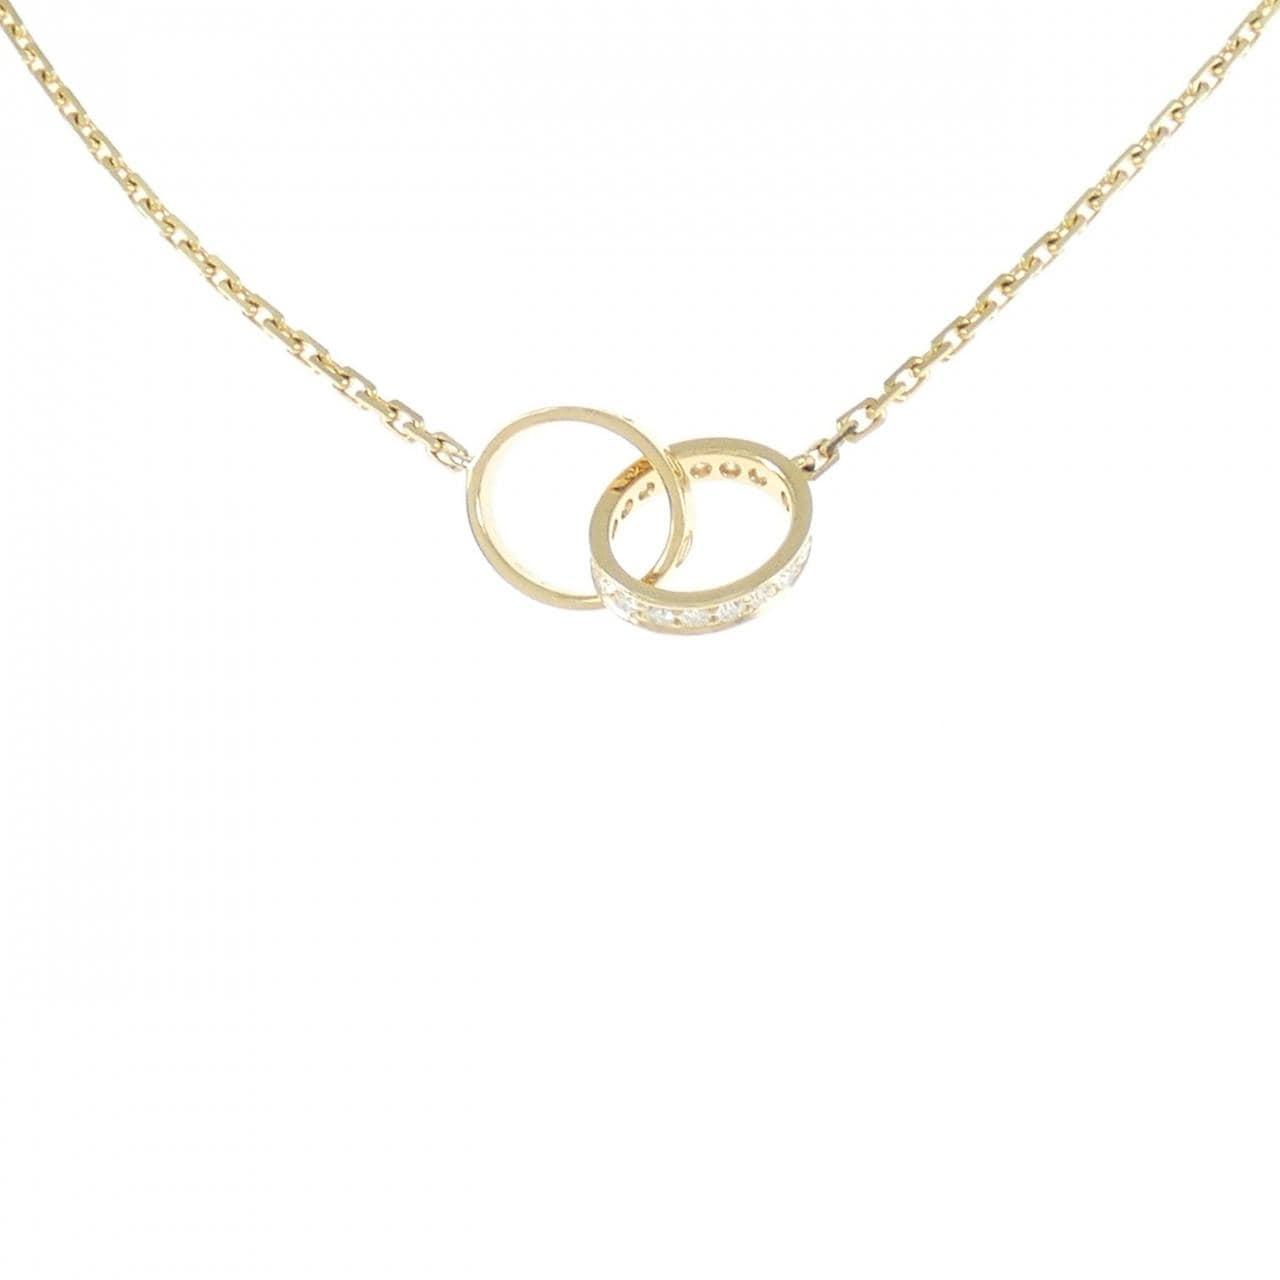 Cartier baby love necklace